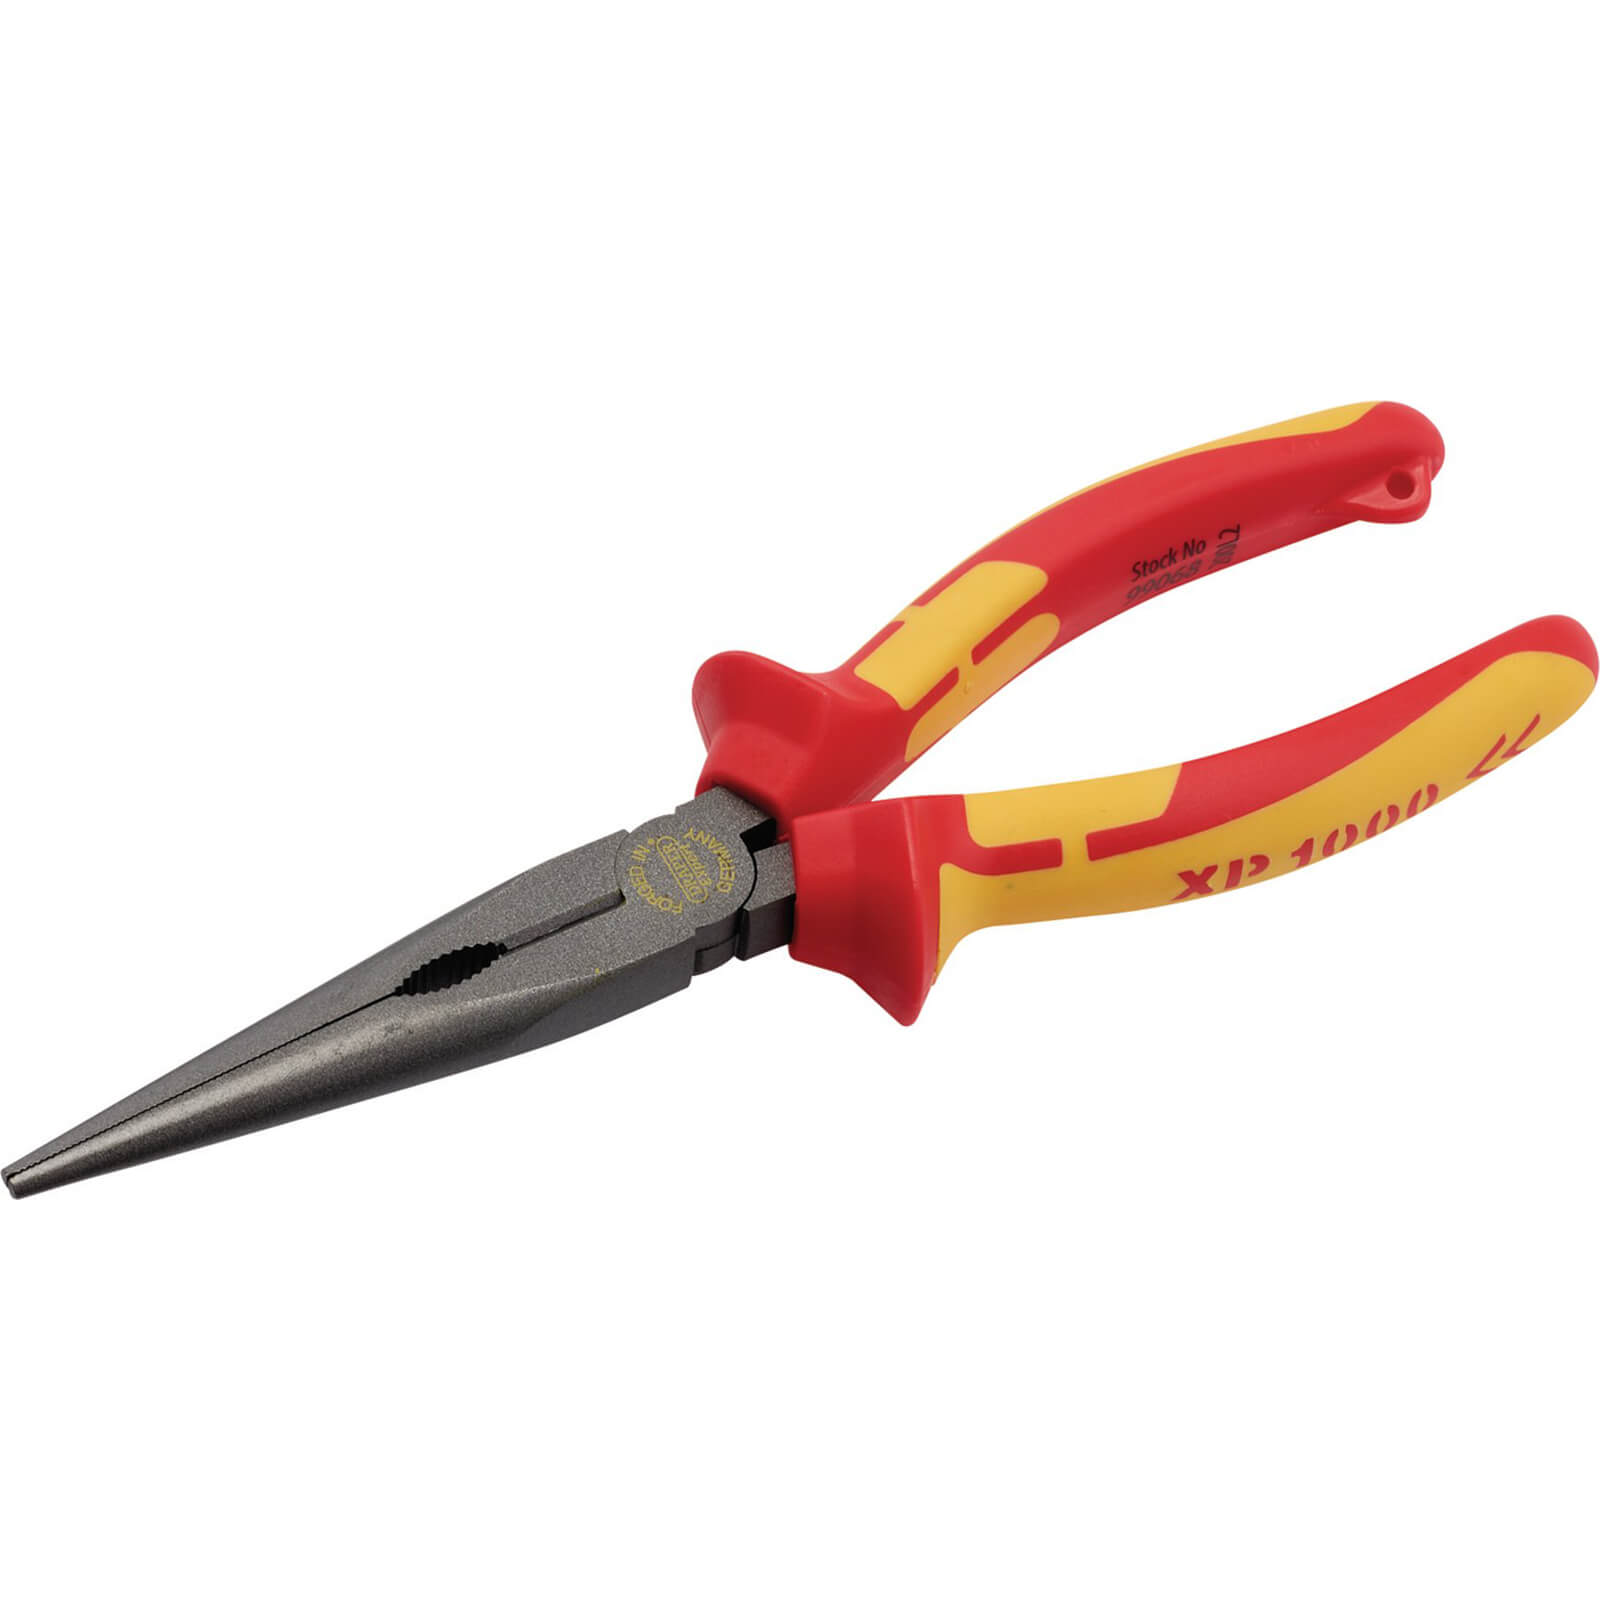 Draper XP1000 VDE Insulated Tethered Long Nose Pliers 200mm